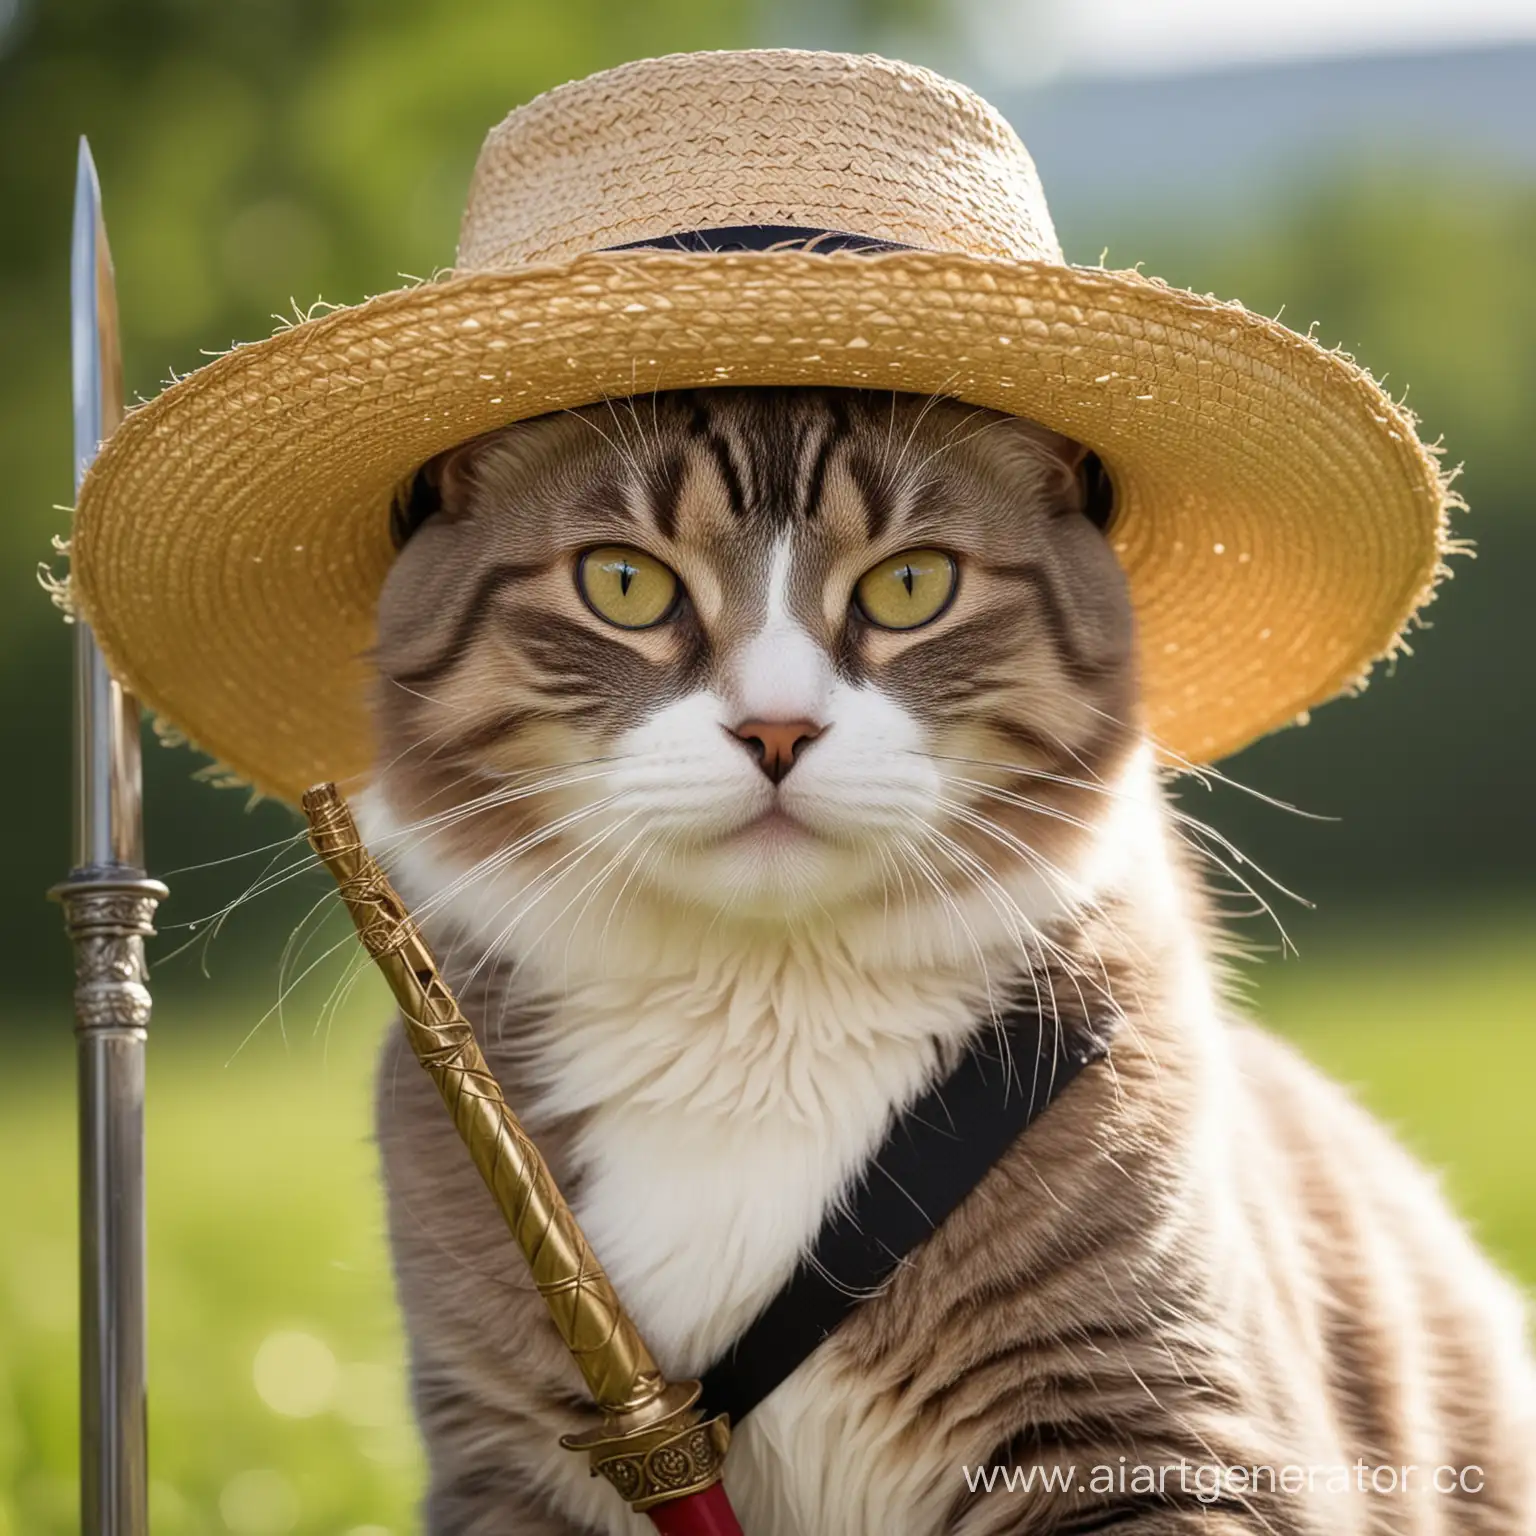 Playful-Cat-Wearing-a-Straw-Hat-and-Wielding-a-Saber